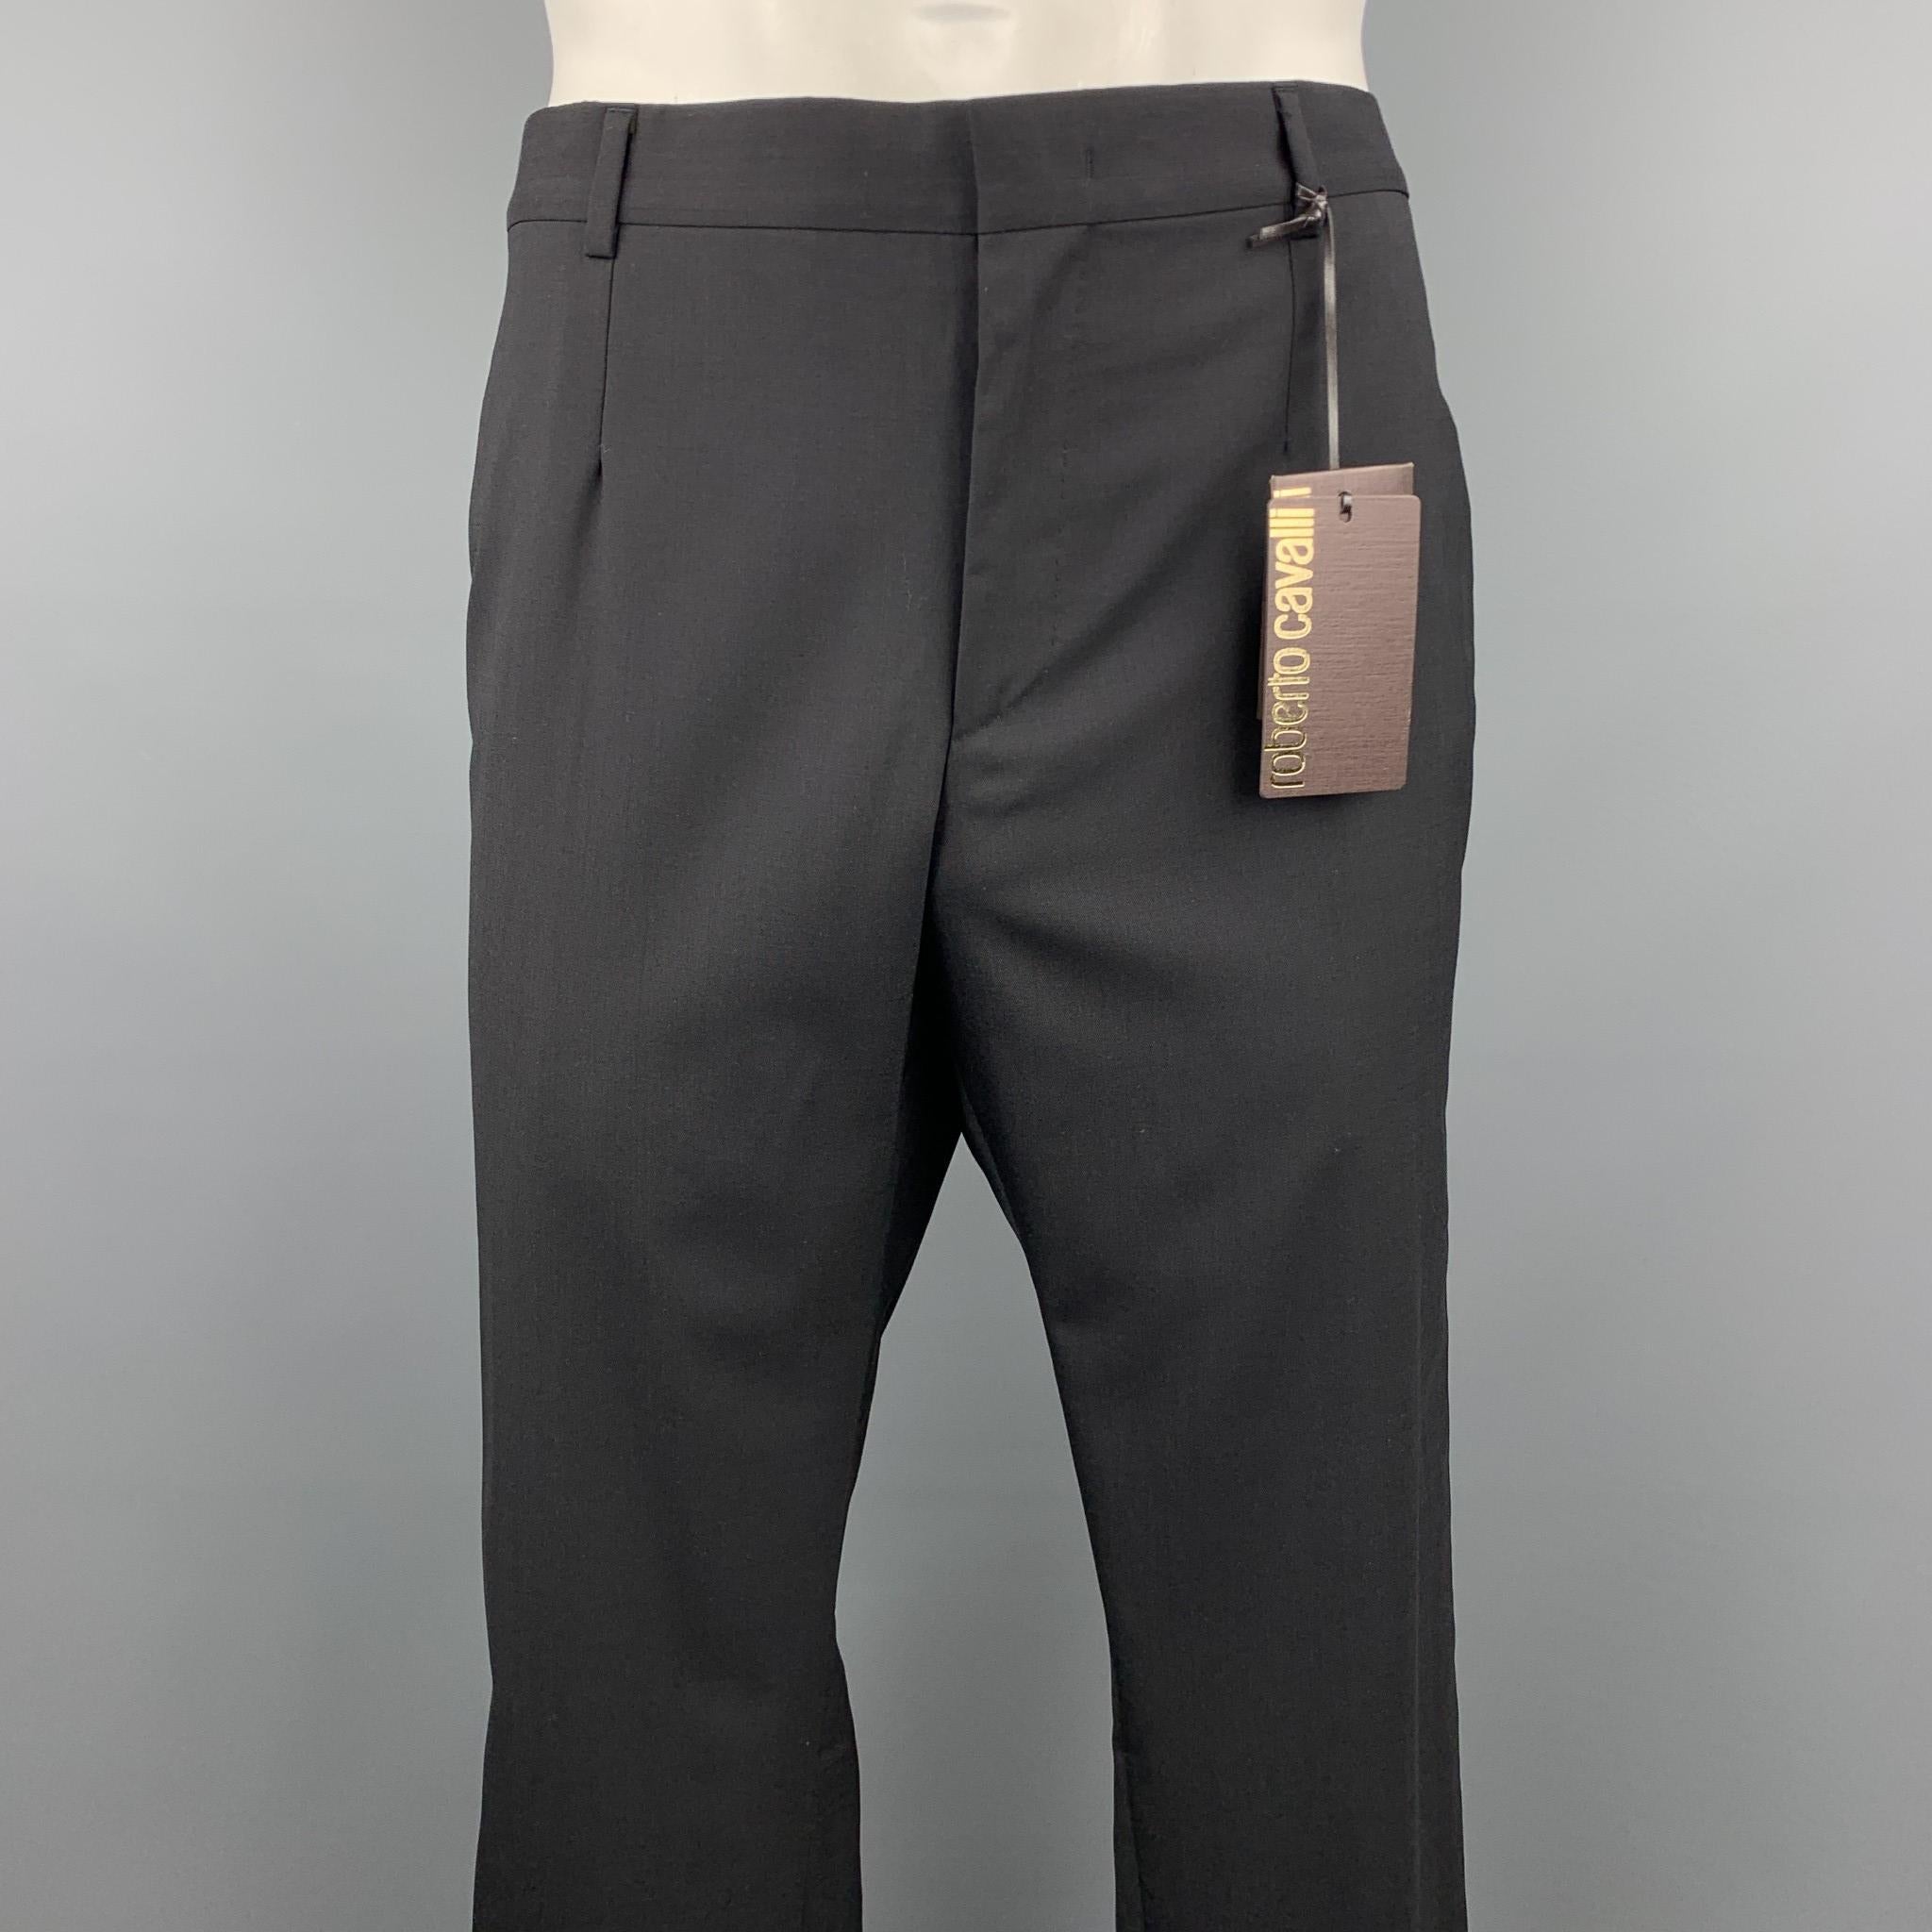 ROBERTO CAVALLI tuxedo dress pants comes in a black wool / elastane featuring a front pleat, metallic trim, and a zip fly closure. Made in Italy.

New With Tags. 
Marked: IT 54

Measurements:

Waist: 40 in.
Rise: 9.5 in. 
Inseam: 37 in. 